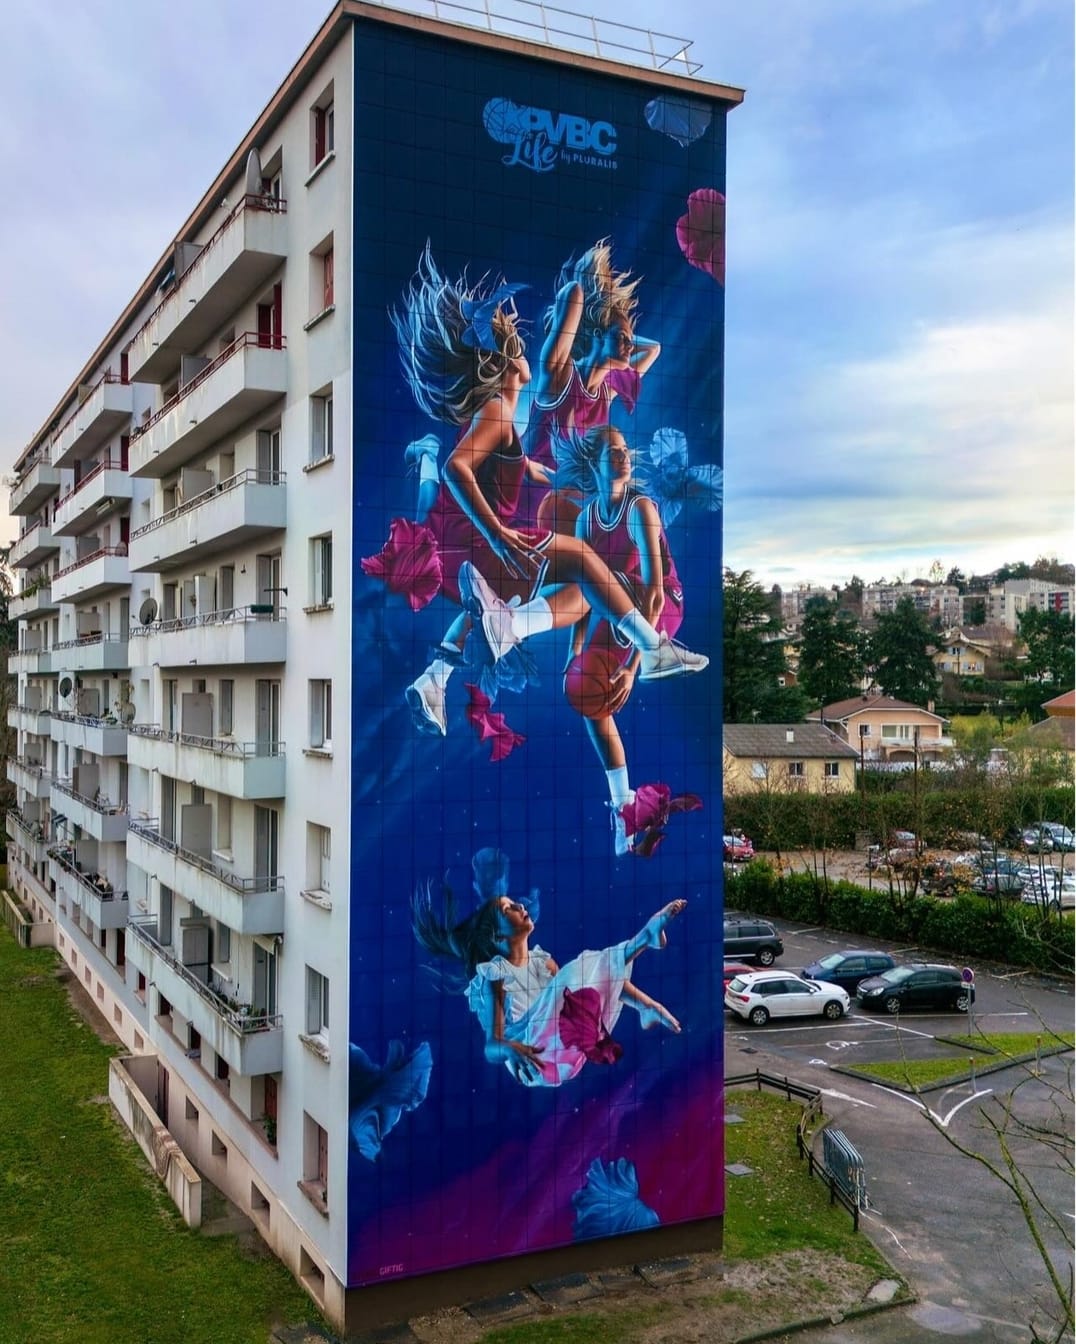 Mural of young women athletes flying, painted on the end of an apartment building in France